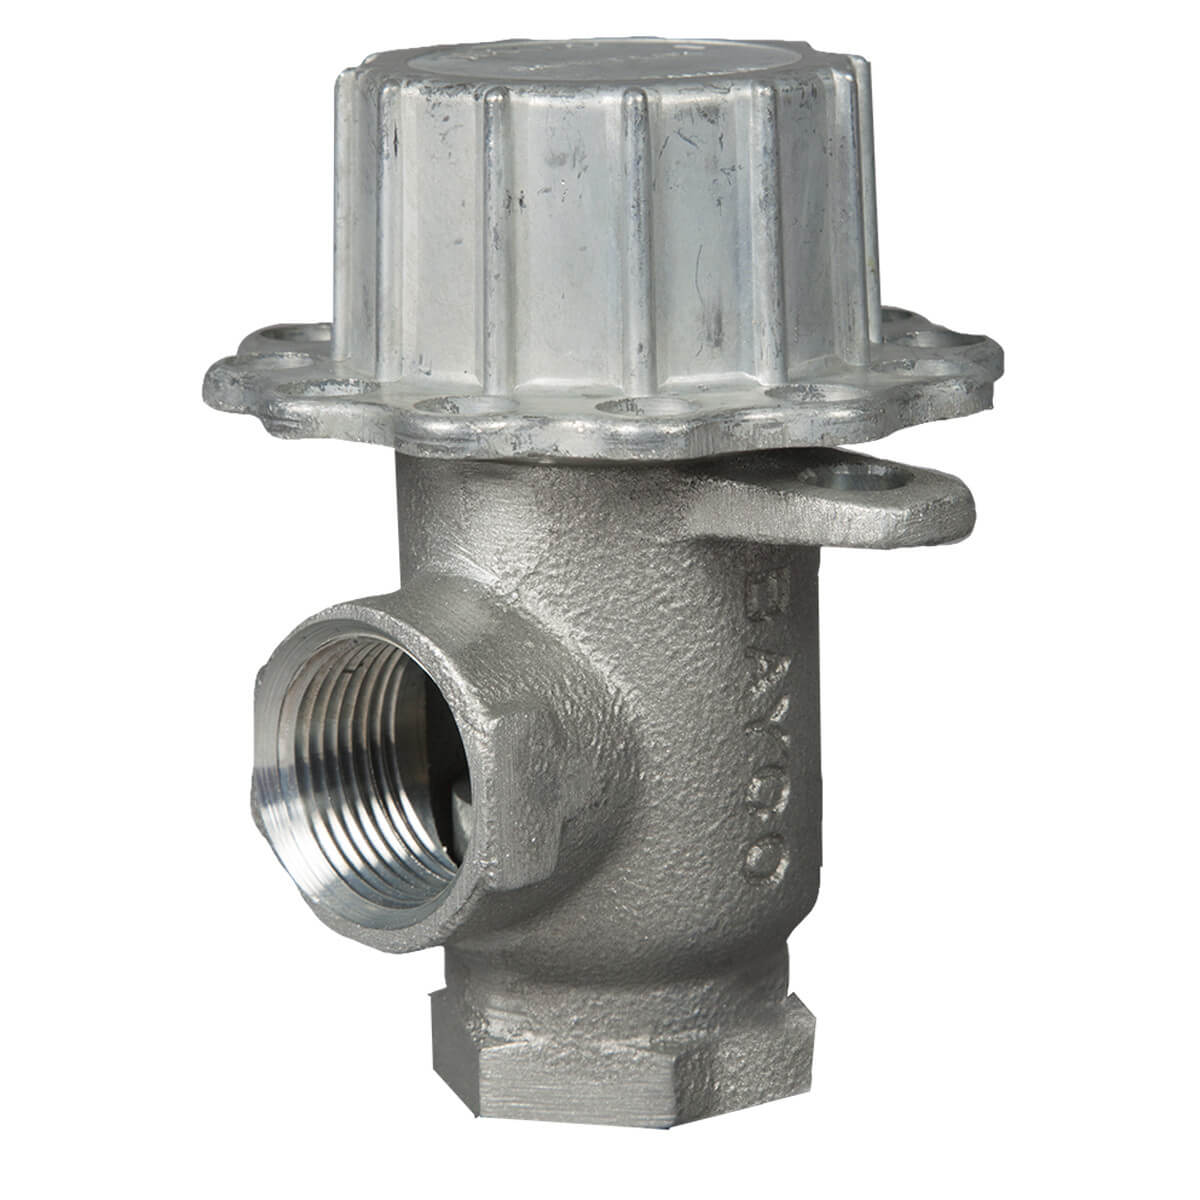 Fuel Angle Lock Valve - 1 1/4-in